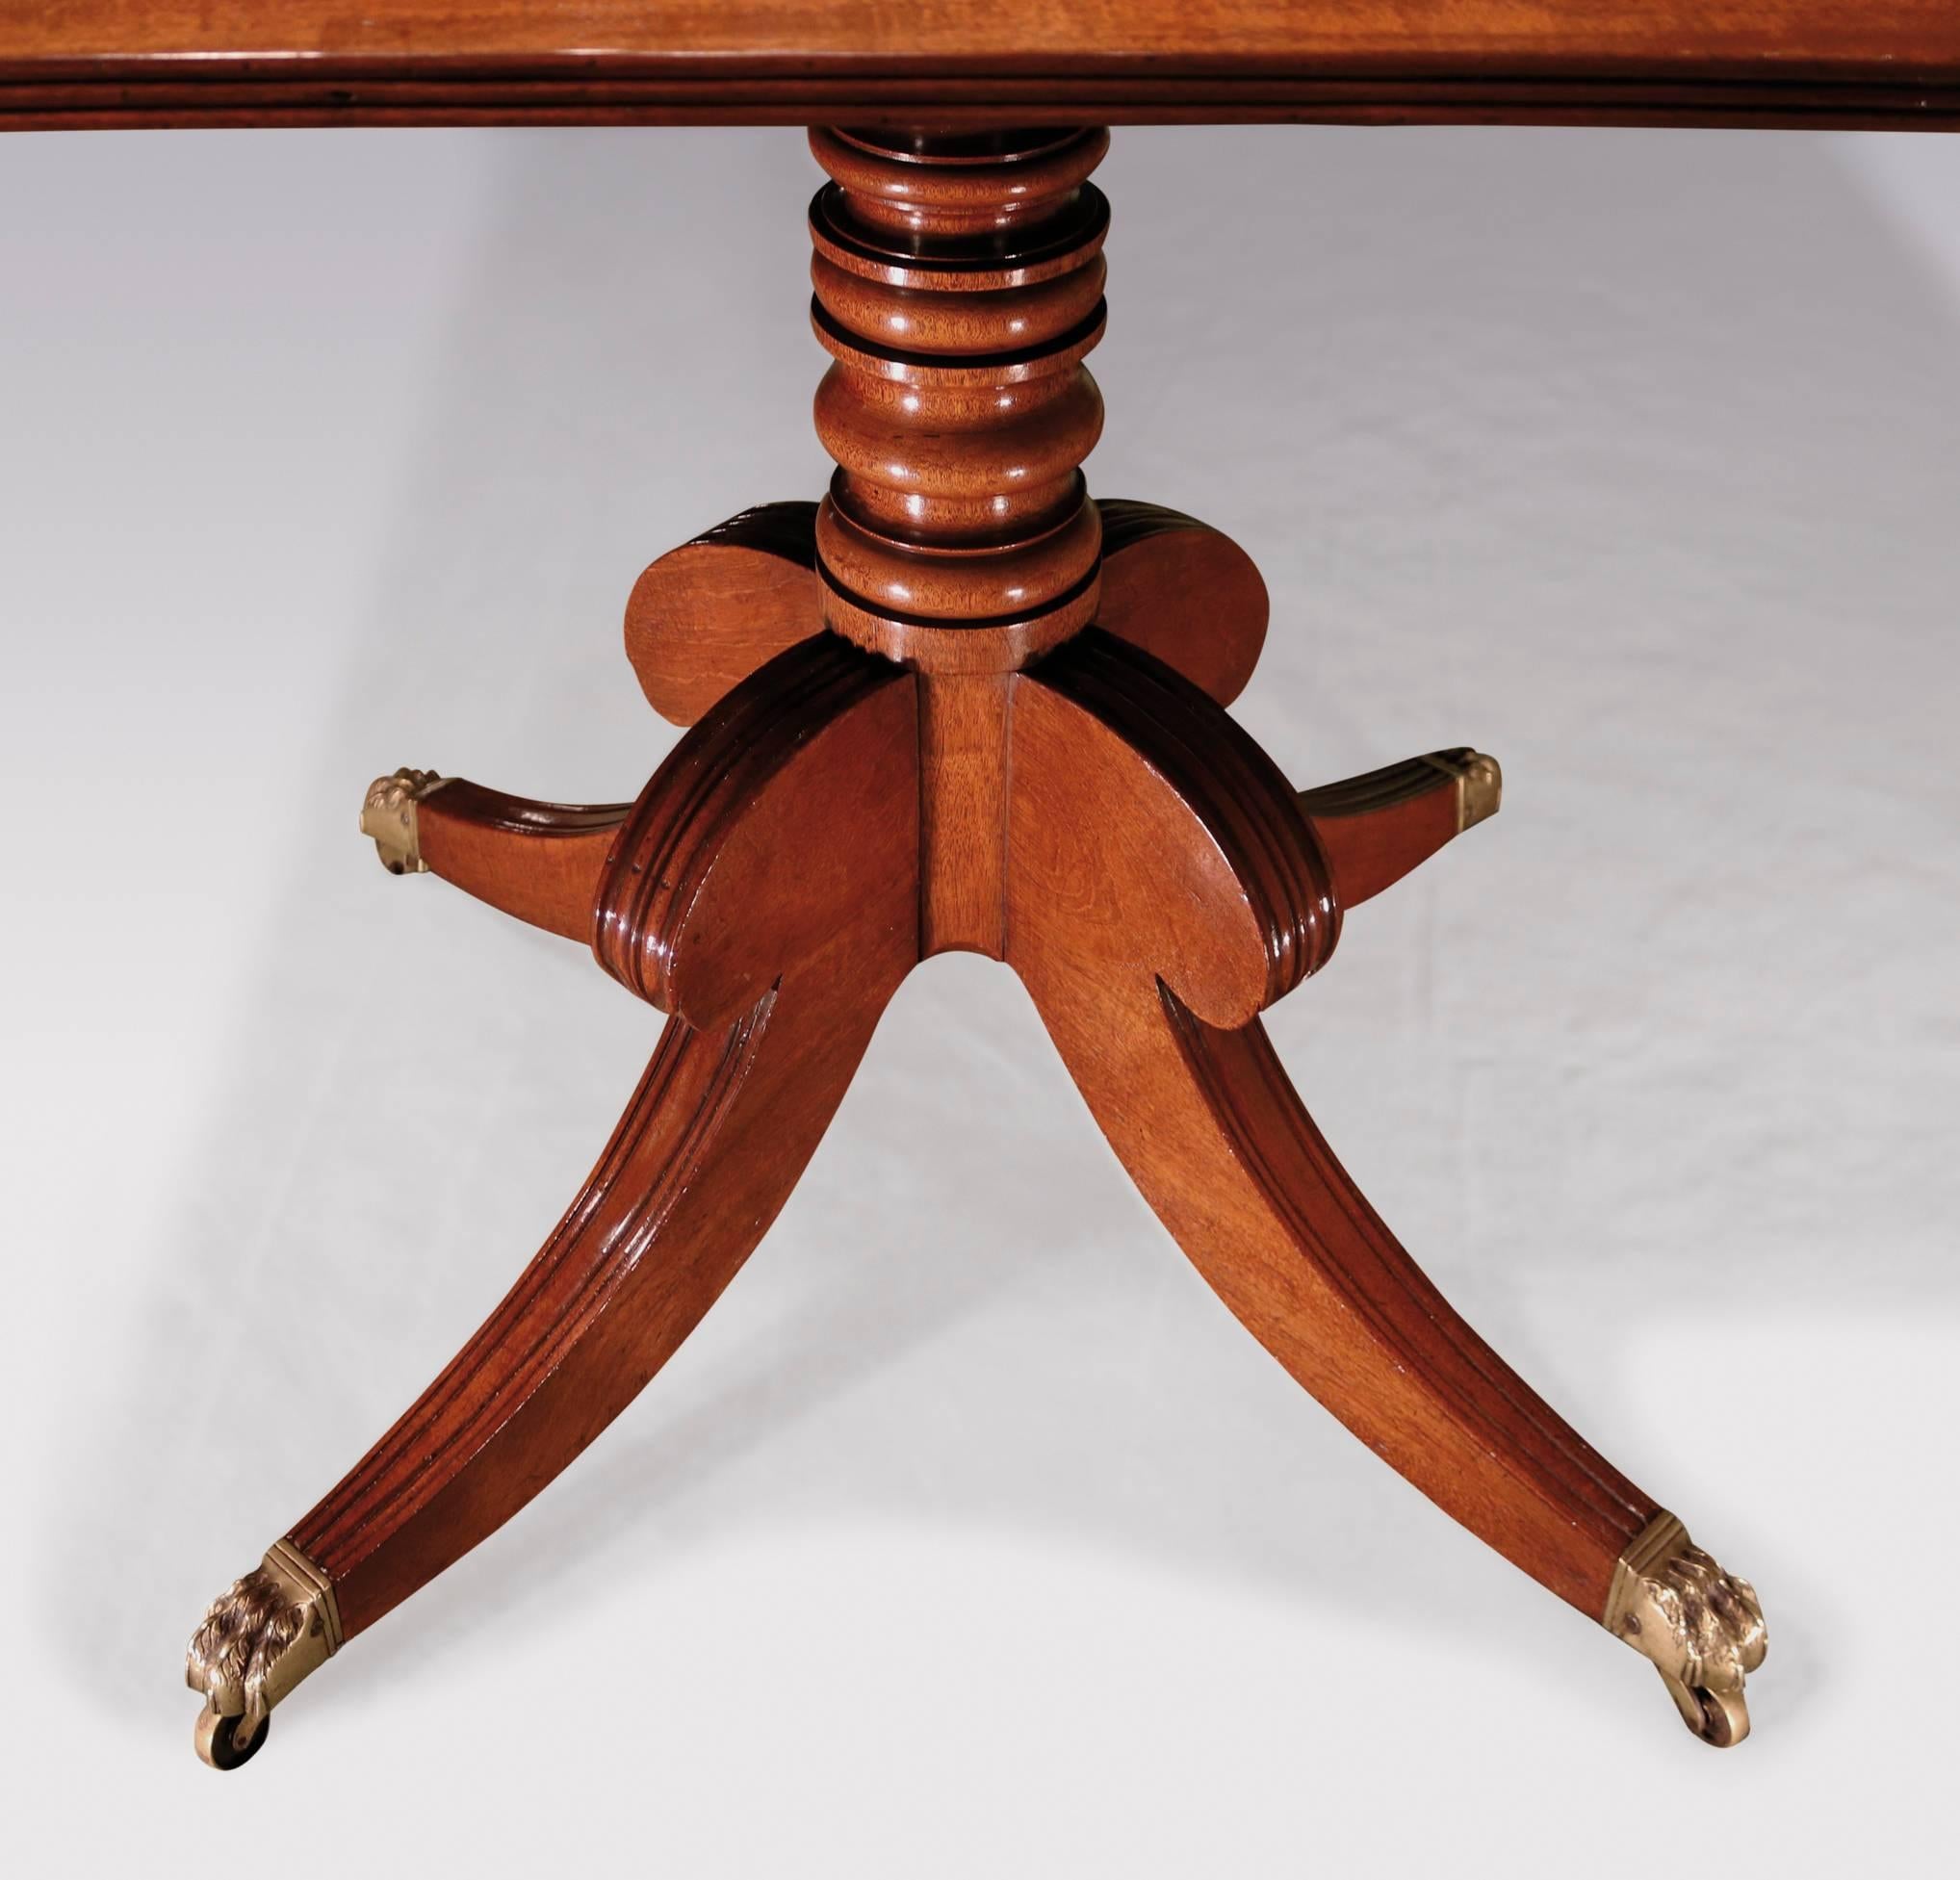 English Regency period mahogany two-pedestal dining table